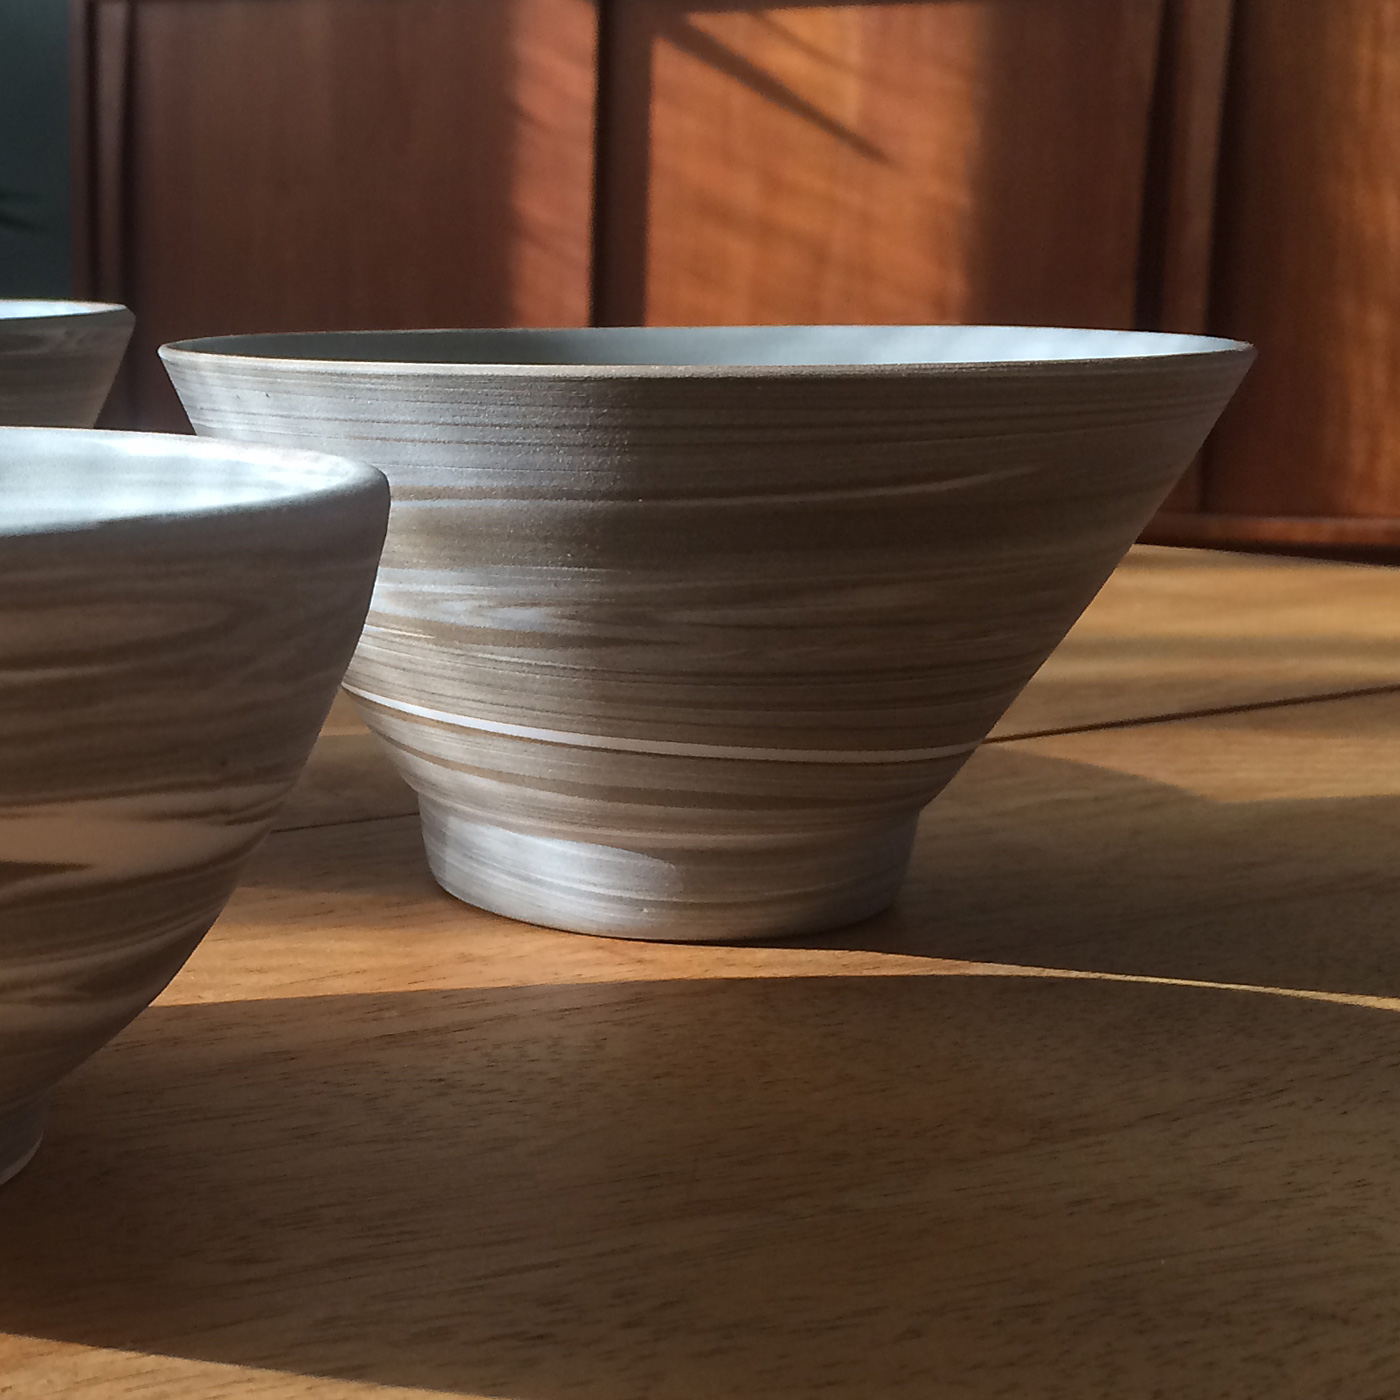 Marbled clay bowls, by La Datcha